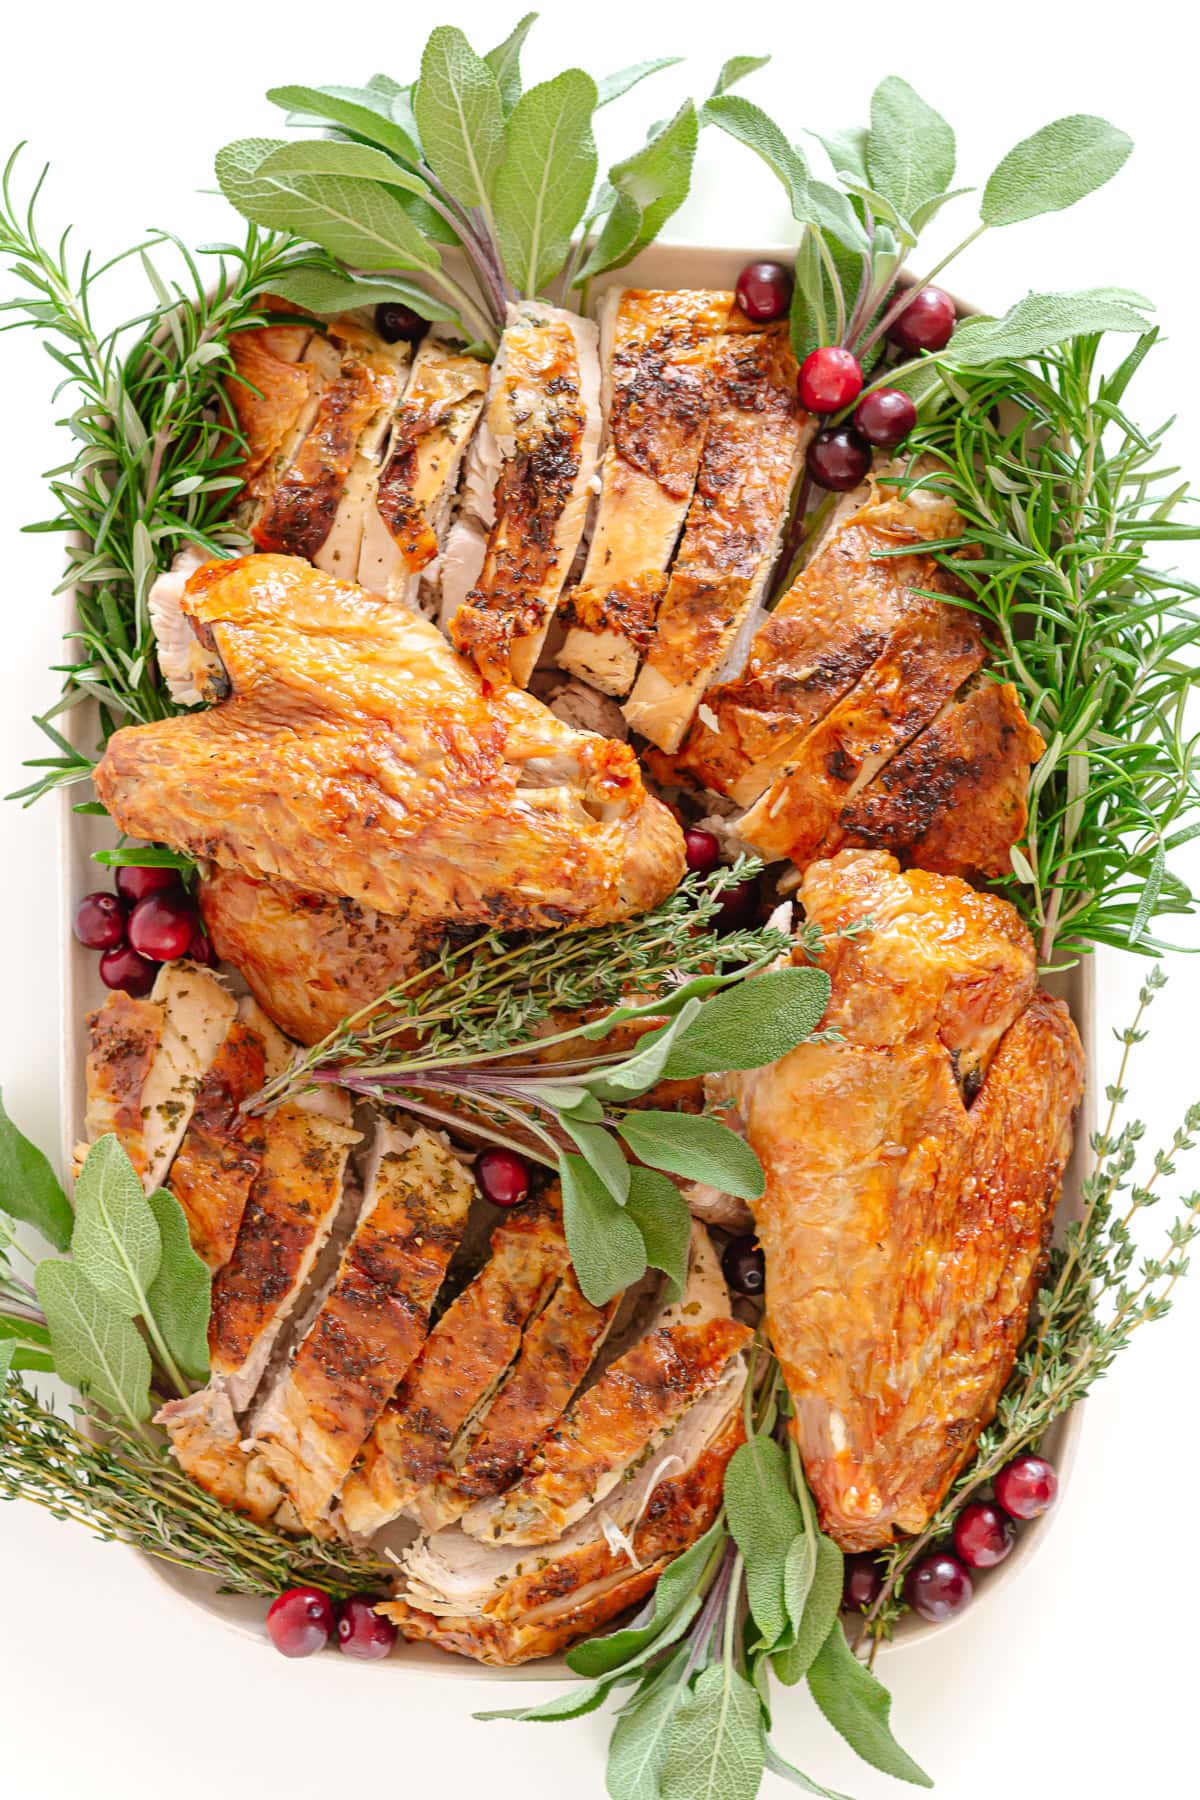 Platter of carved roast turkey garnished with herbs and fresh cranberries.